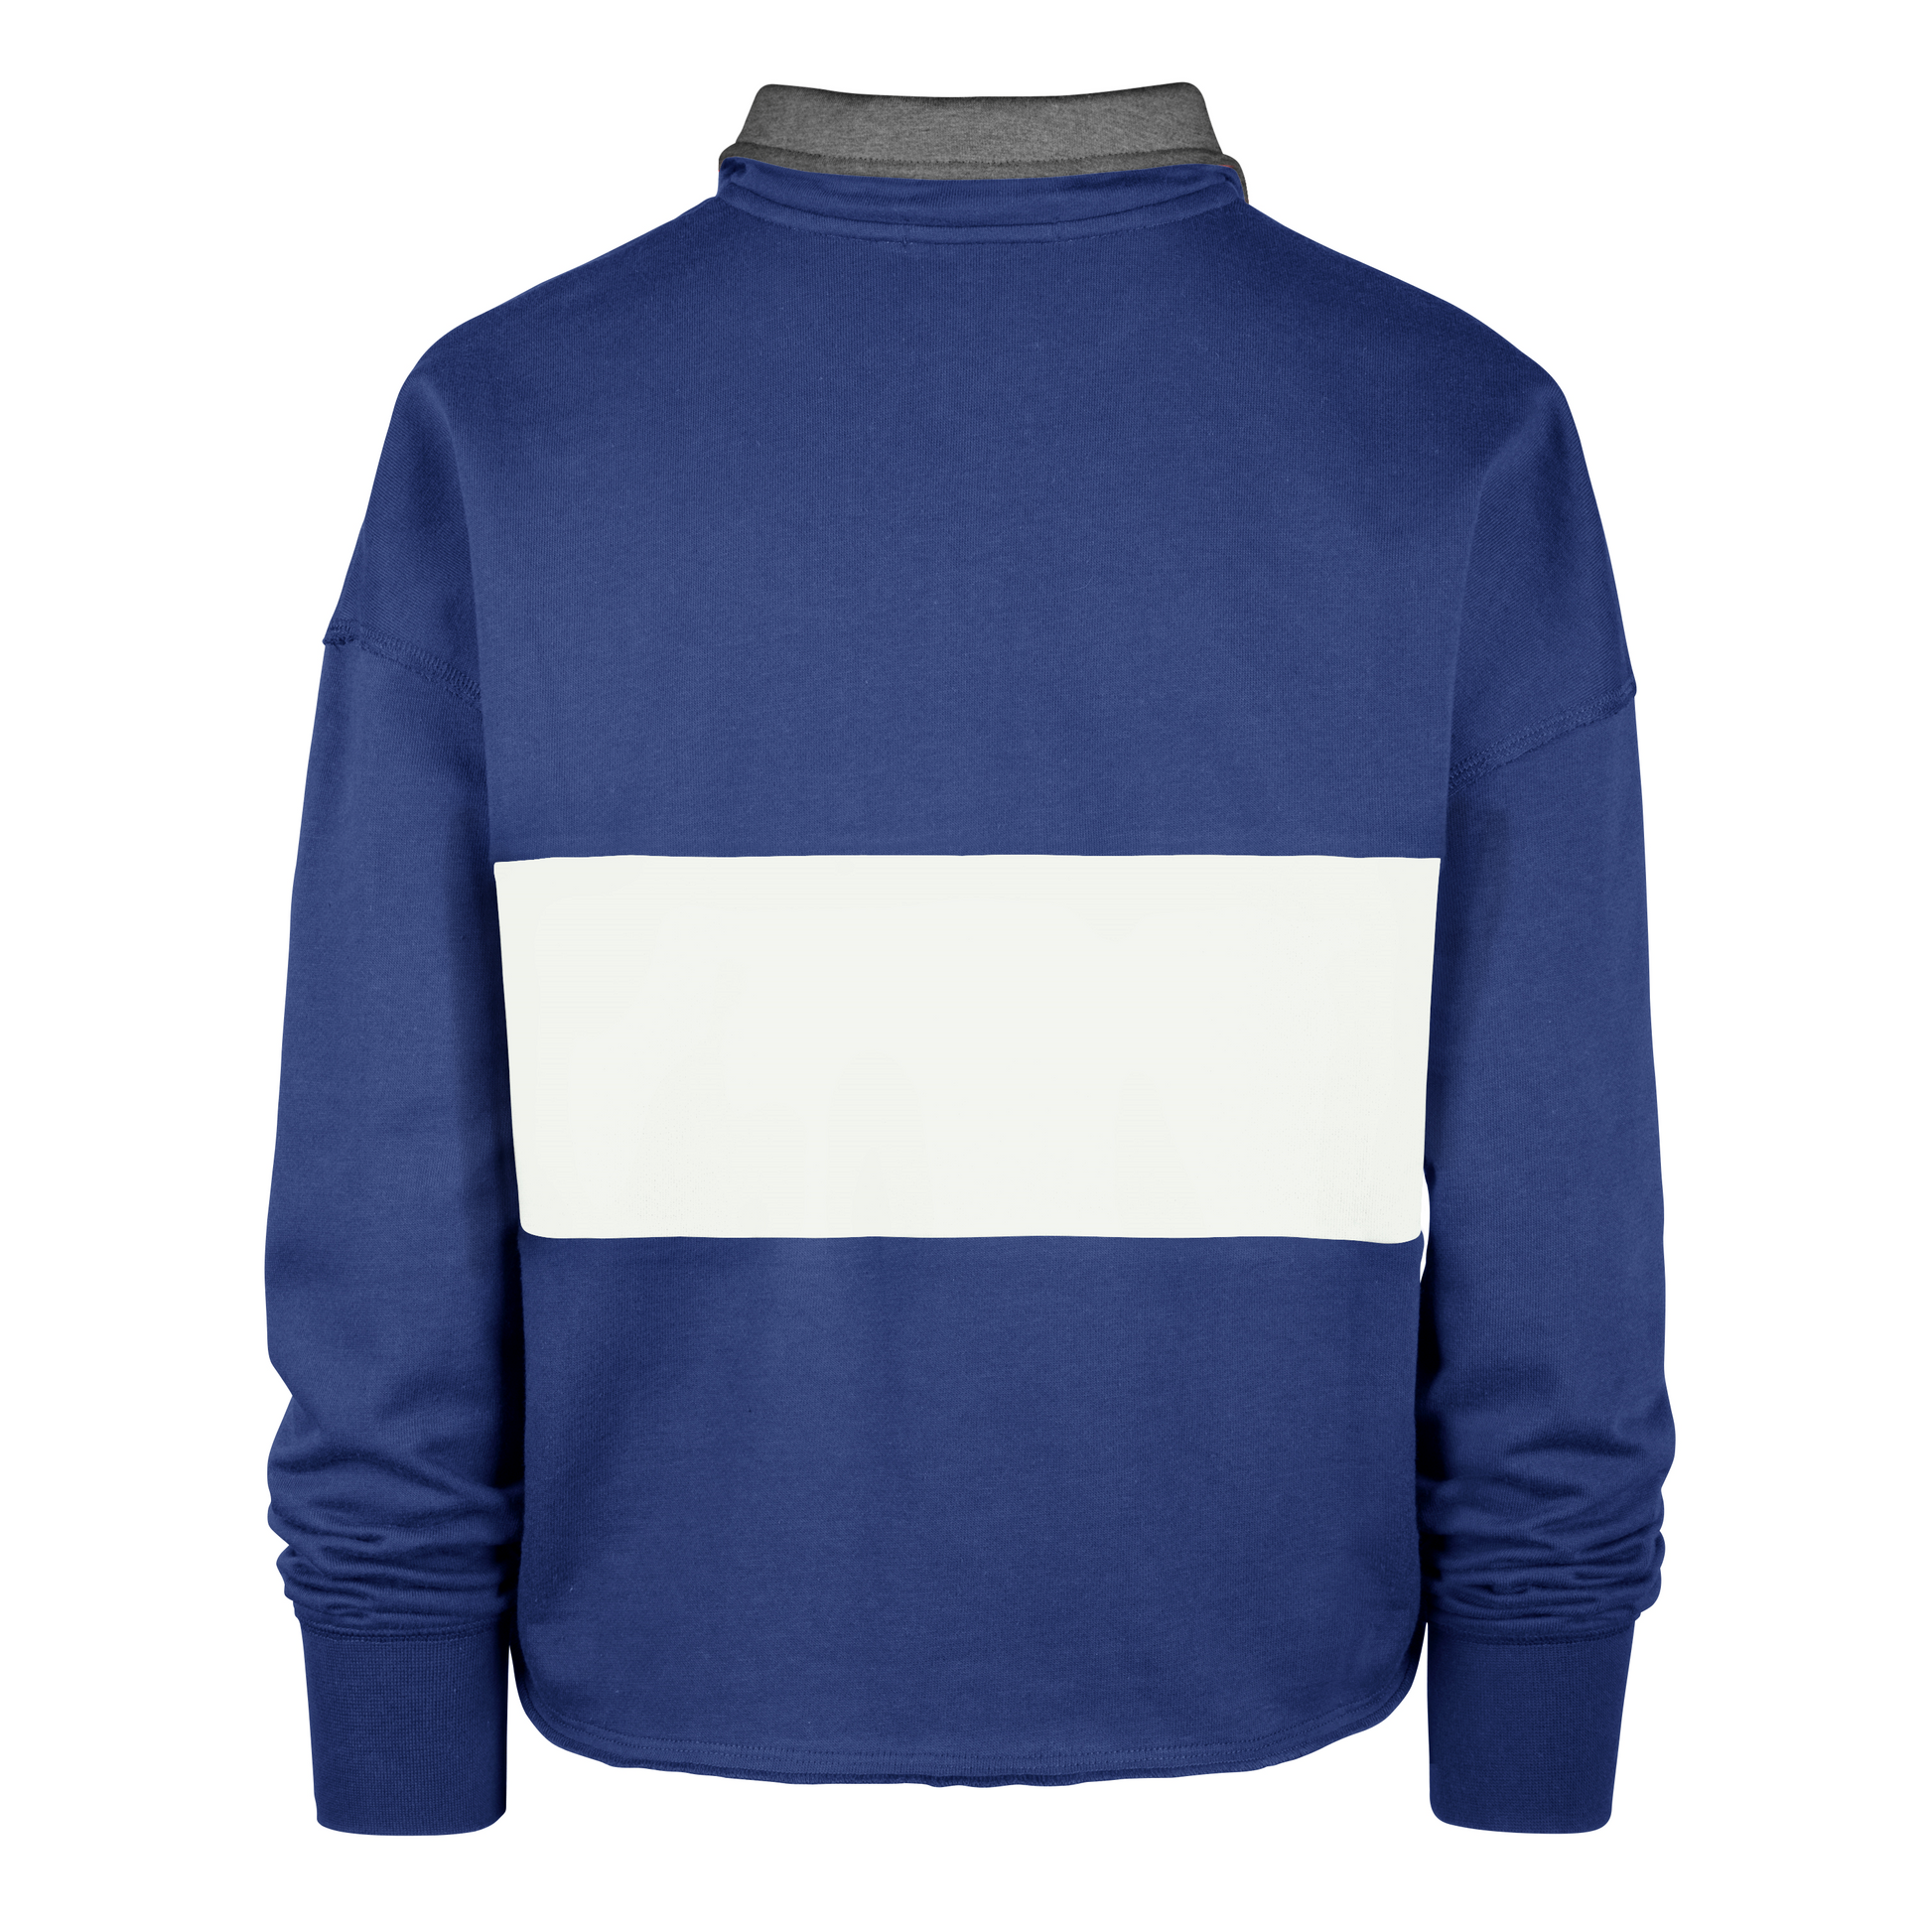 Back: Blue and white quarter zip with gray collar